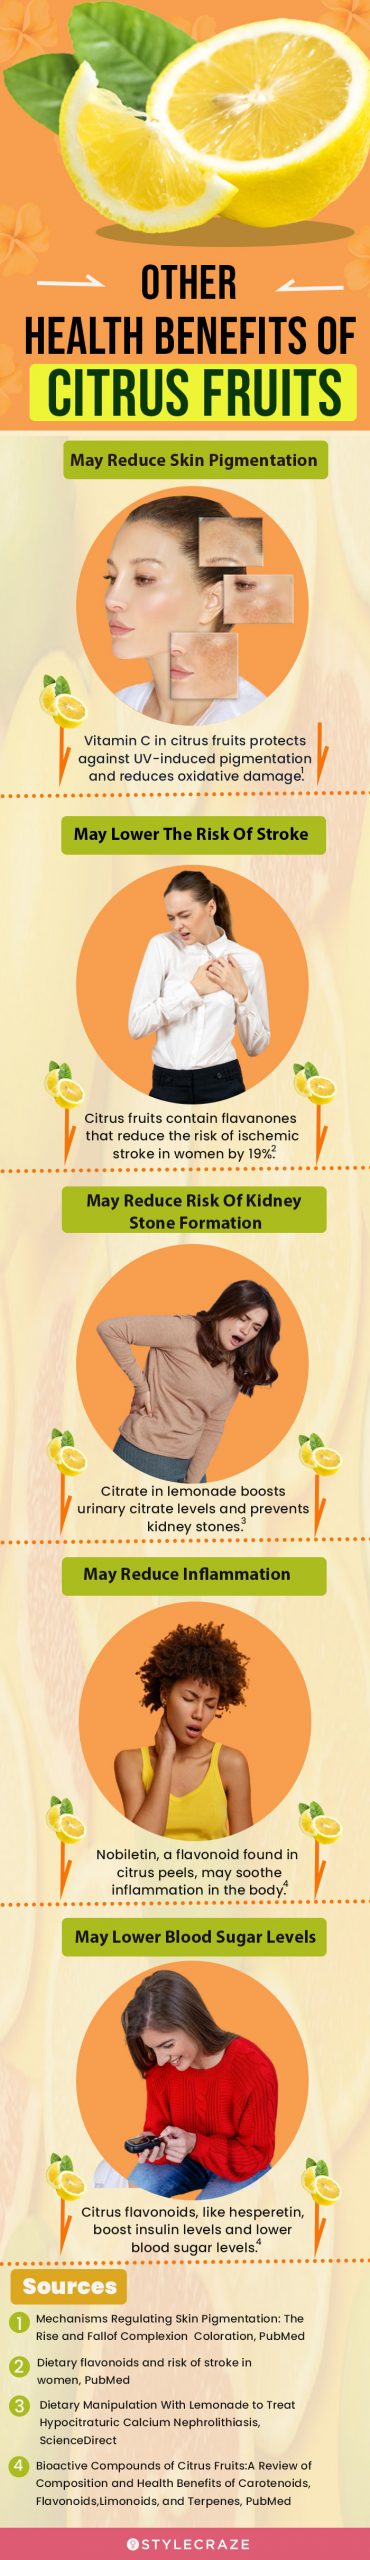 other benefits of citrus fruits [infographic]